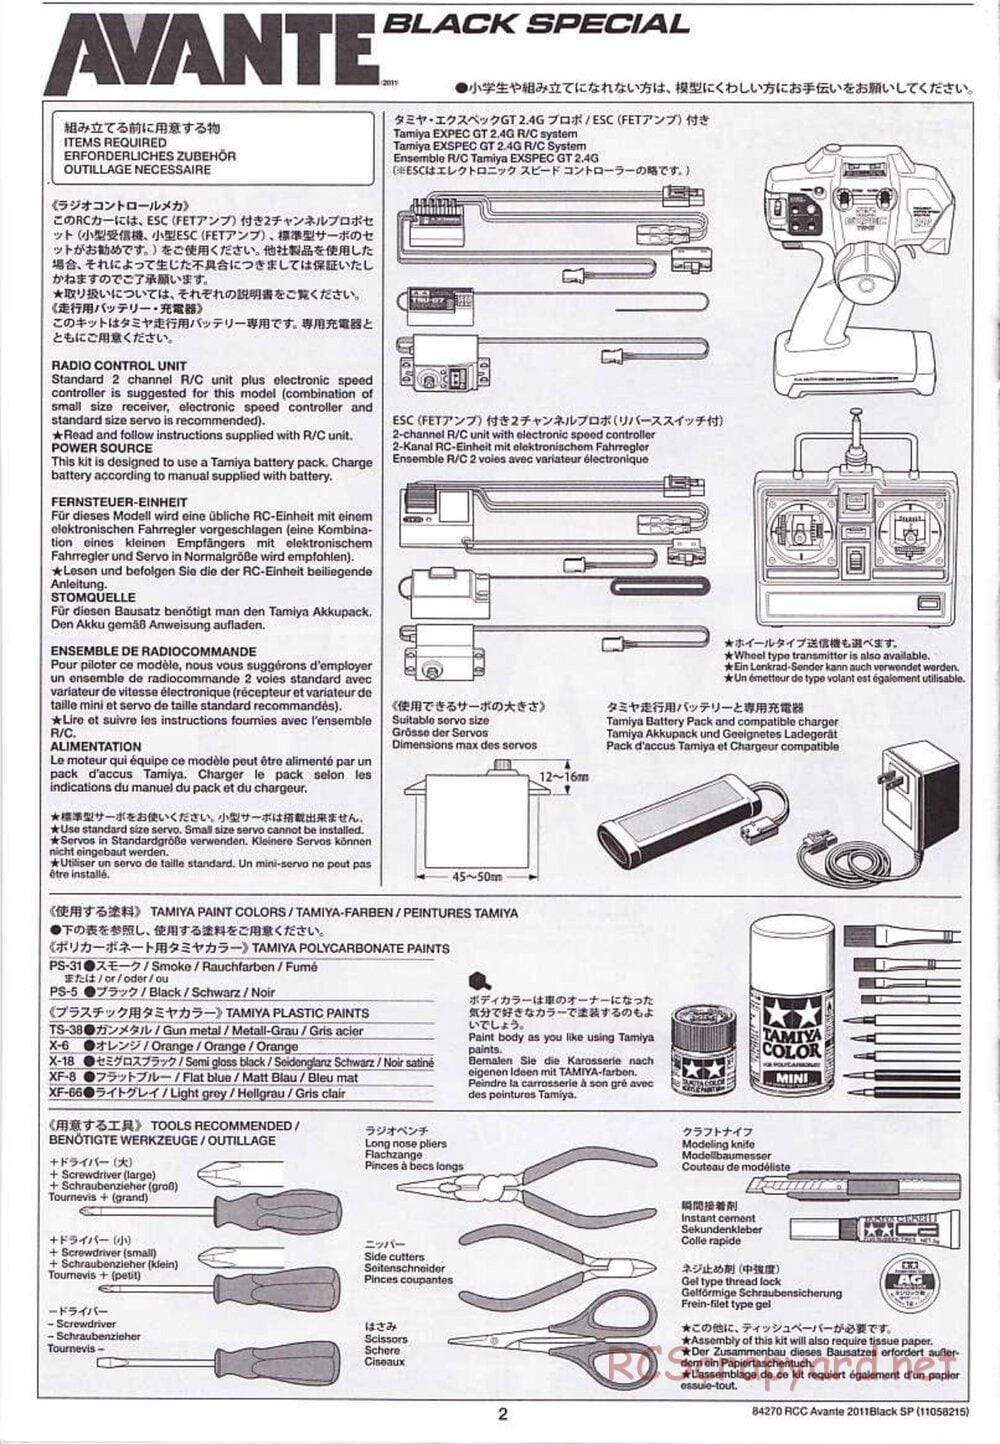 Tamiya - Avante 2011 - Black Special Chassis - Manual - Page 2